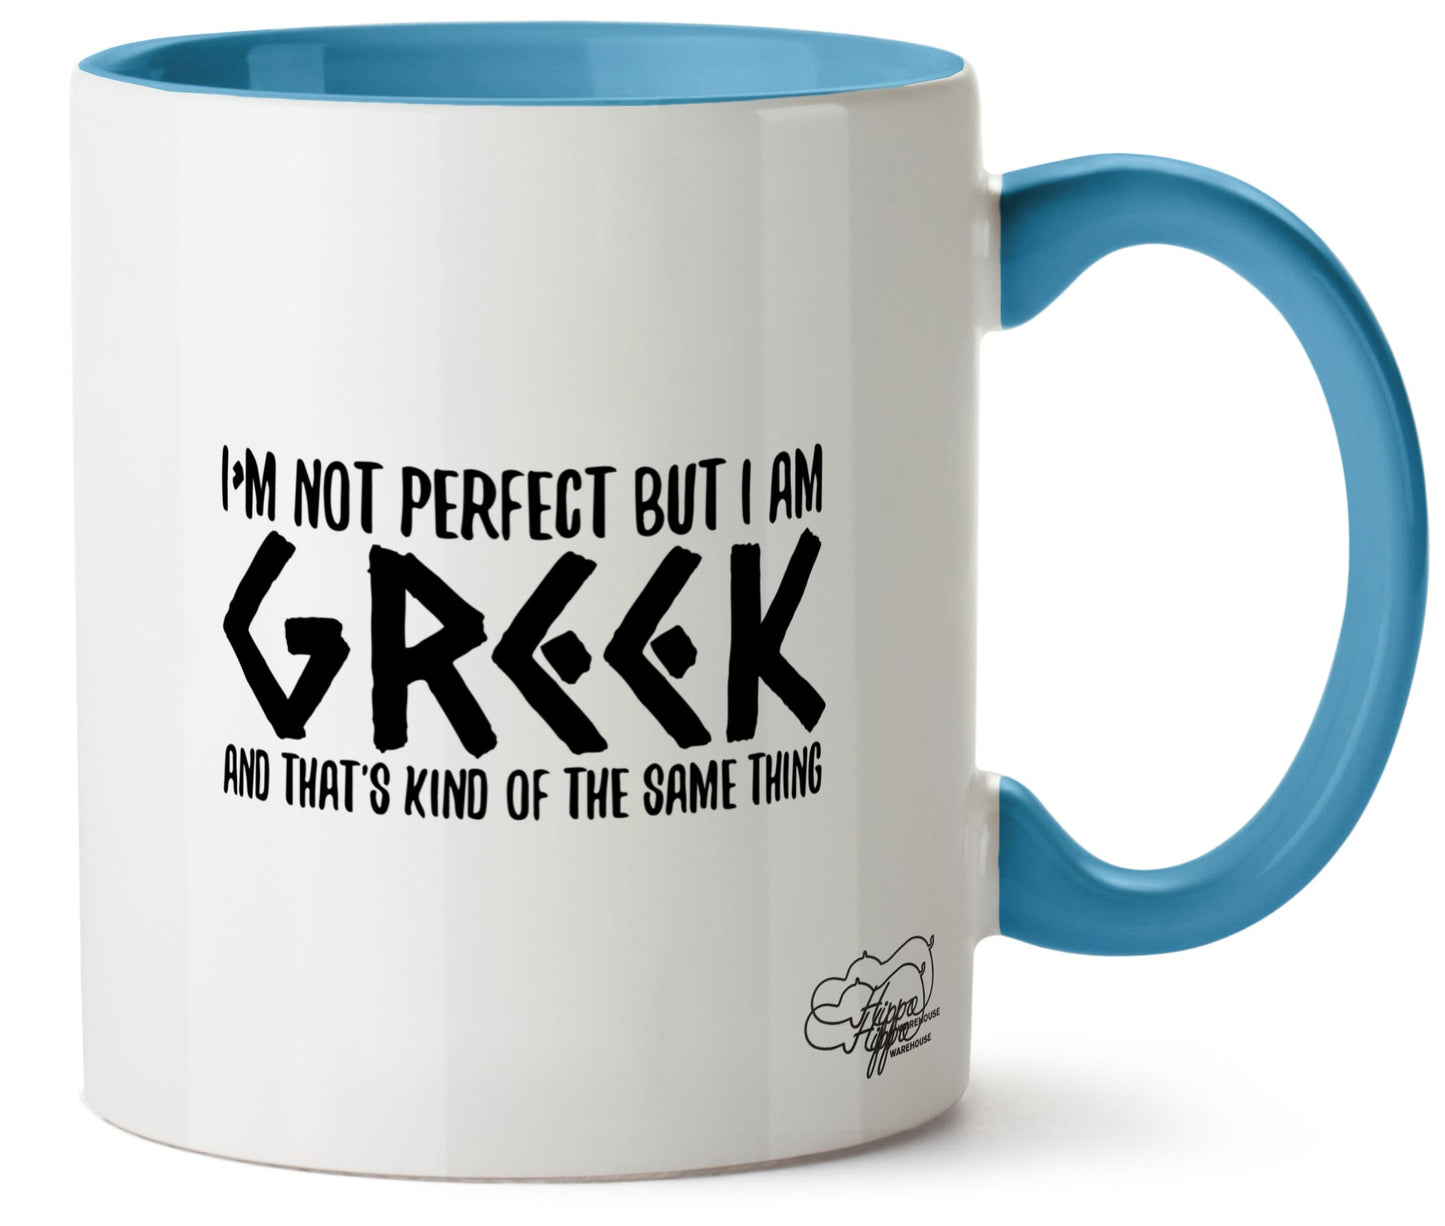 I'm not perfect but I am Greek and that's the same thing Printed 11oz Mug